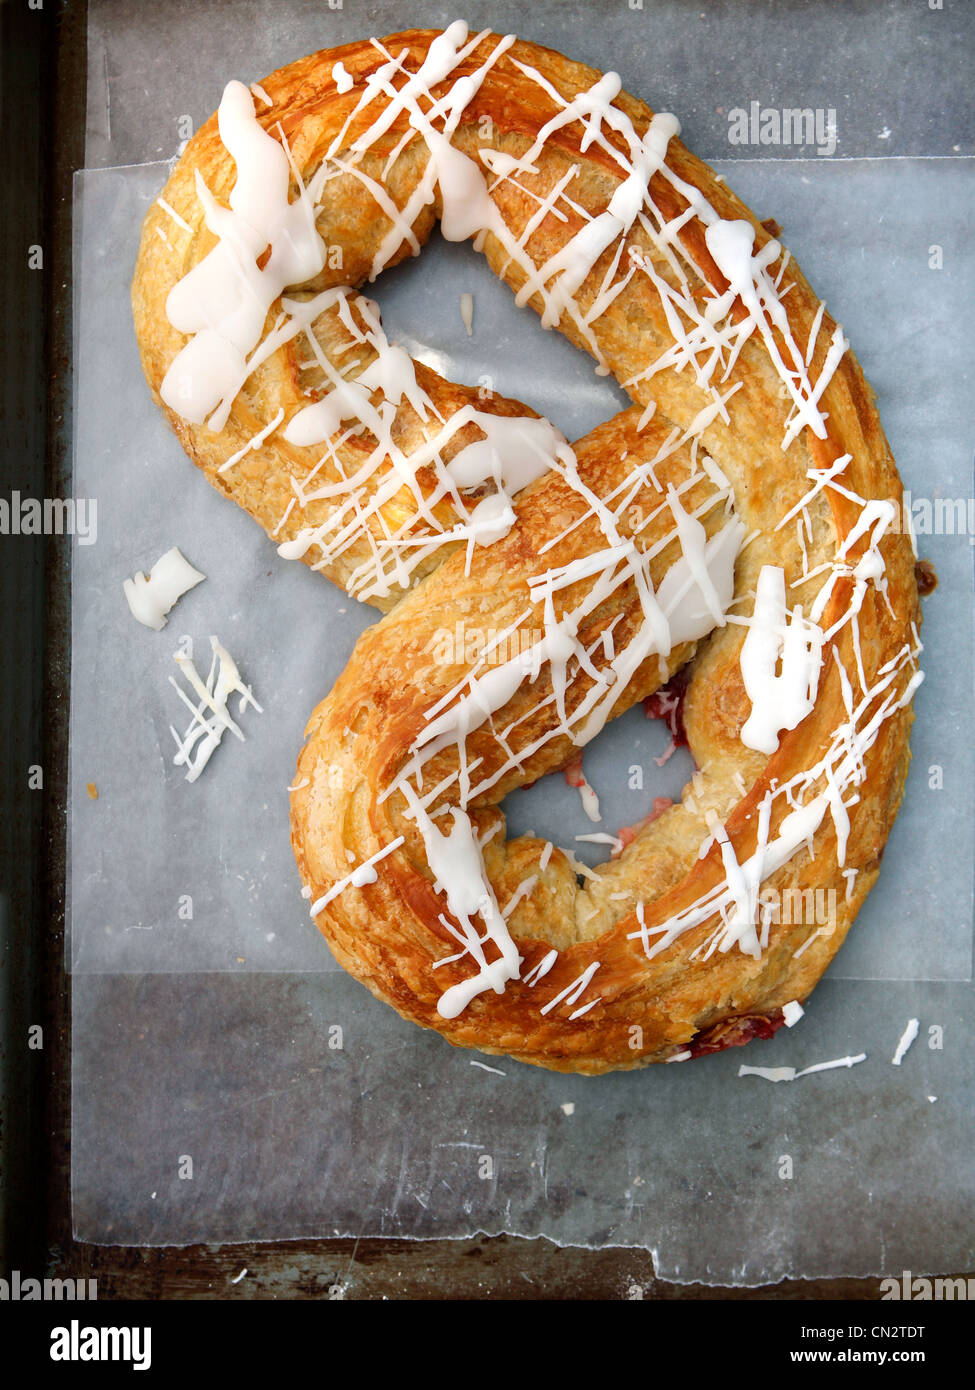 Danish pastry on greaseproof paper Stock Photo